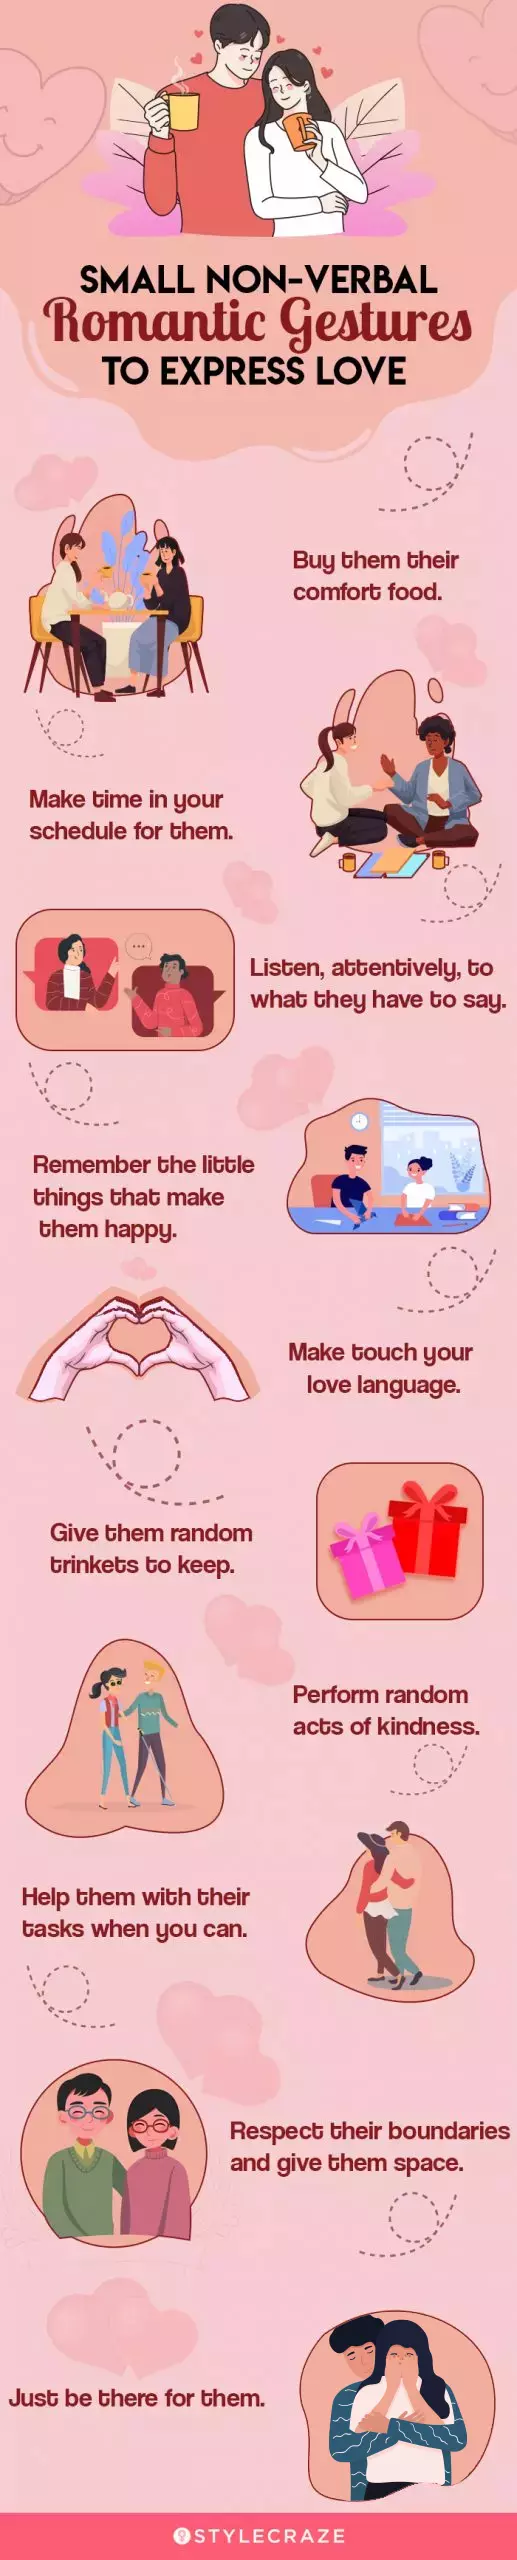 small non verbal romantic gestures to express love (infographic)